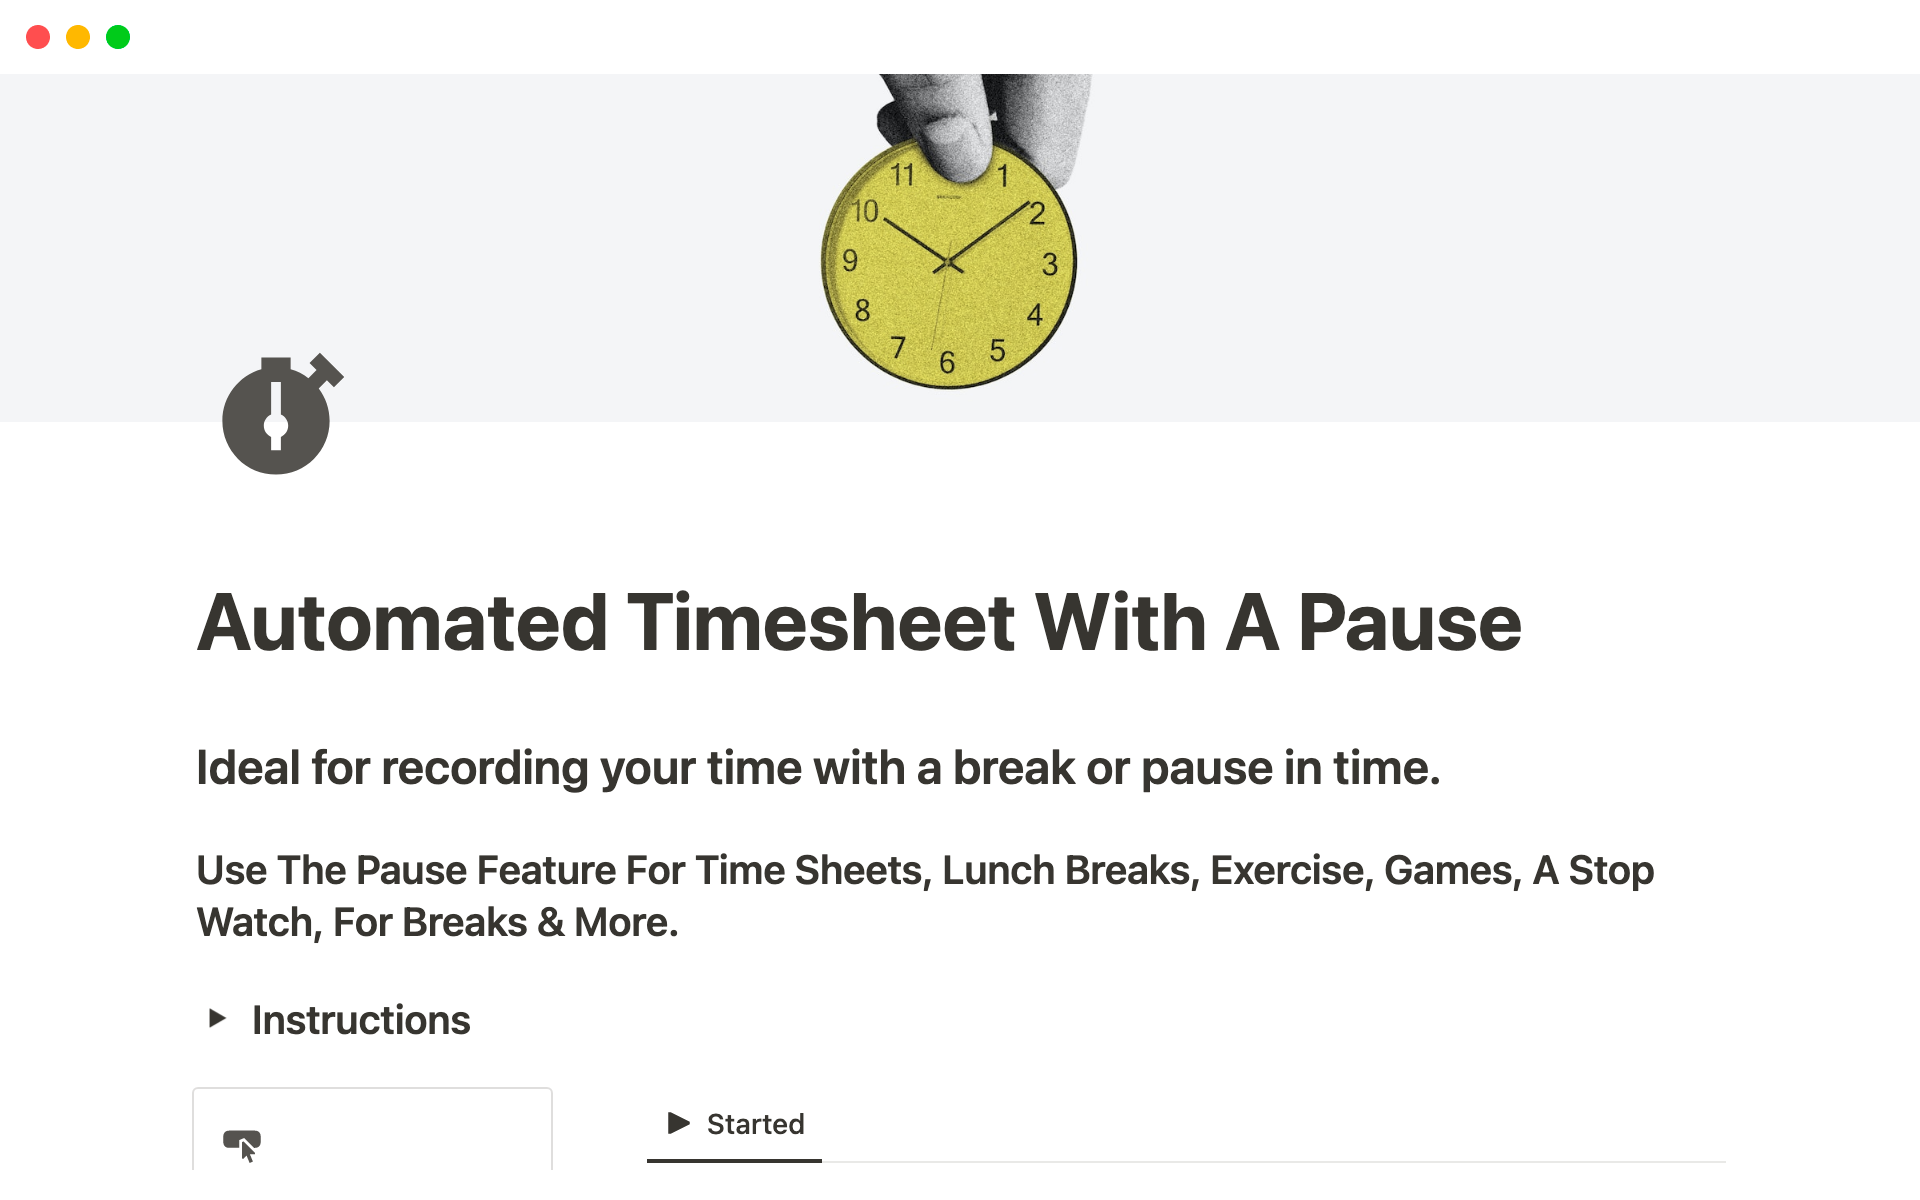 Generate automatic time stamps that track when you start, pause, unpause, and end your time entry. View recorded entries by day, week, and month in automated sorted views.